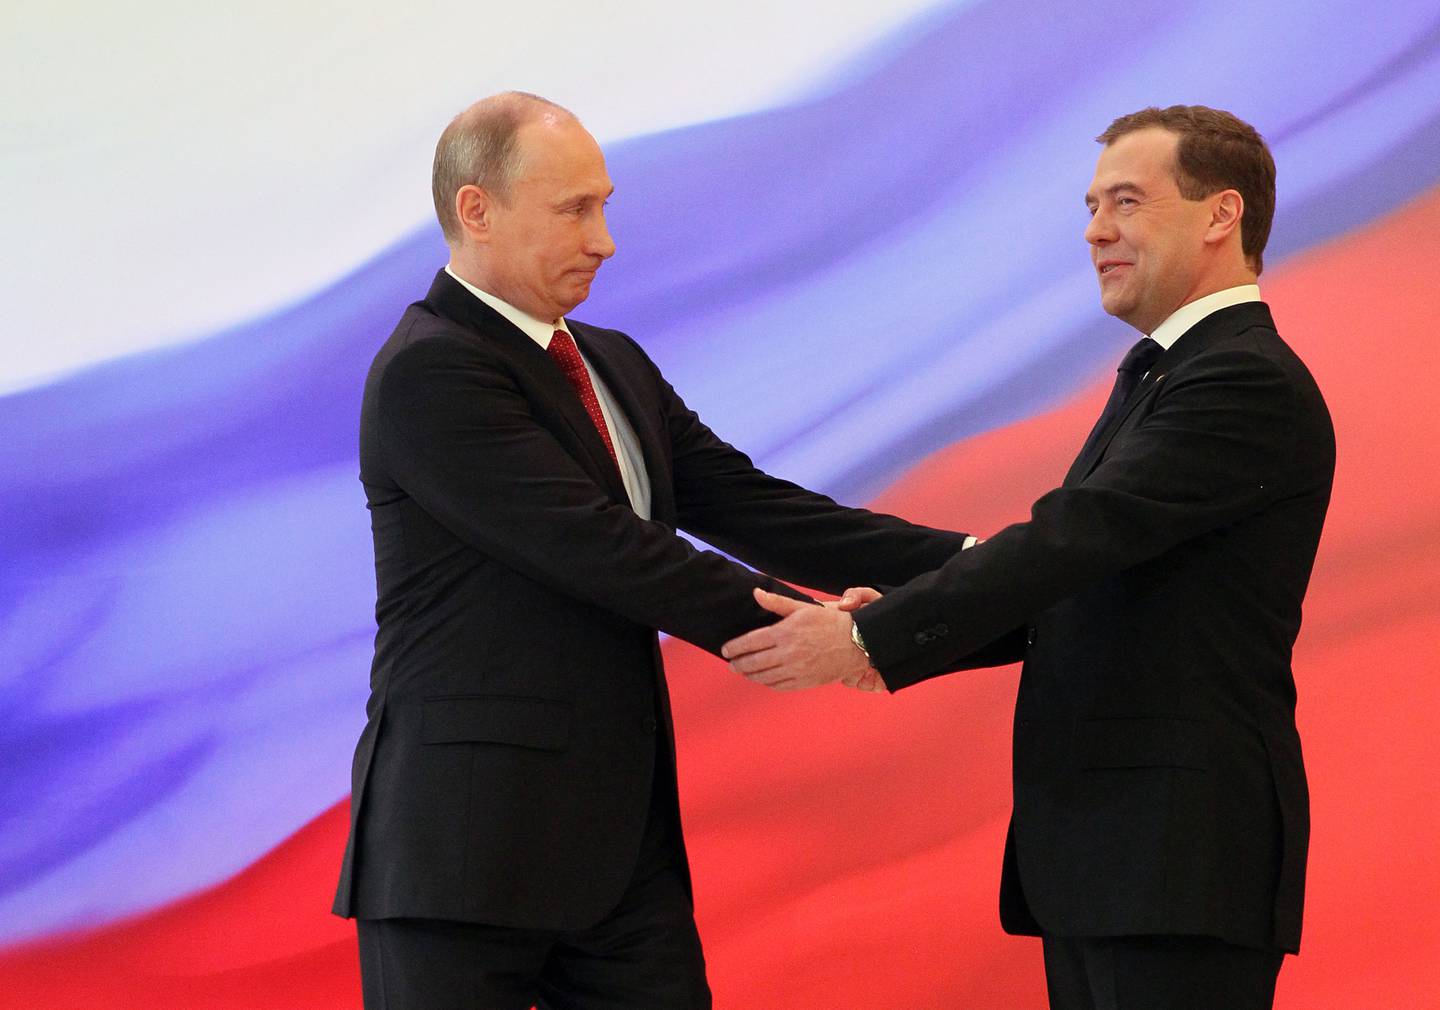 Russian President Vladimir Putin, left, and former President Dmitry Medvedev shakes hands at the inauguration ceremony in the Kremlin in Moscow on Monday, May 7, 2012. Vladimir Putin has been sworn in as Russia's president for a third term after four years as prime minister. (AP Photo/RIA Novosti Kremlin, Yekaterina Shtukina, Presidential Press Service)